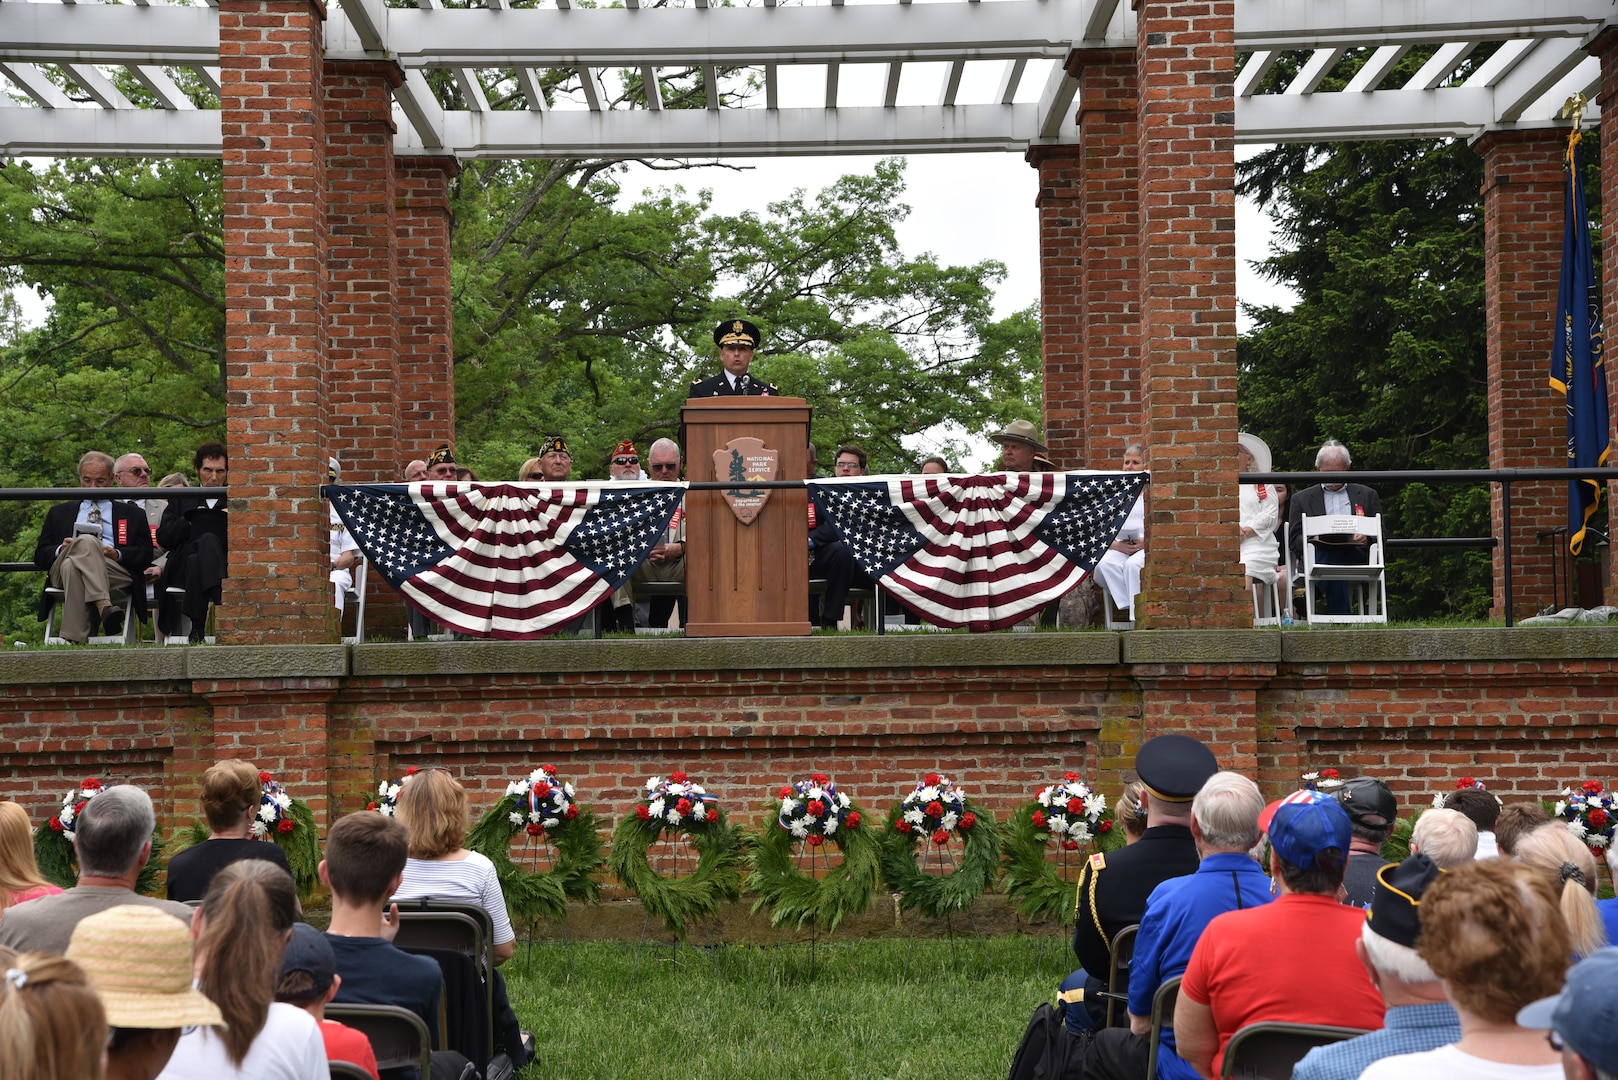 Memorial Day Observed Parade, Ceremony in Gettysburg > Defense